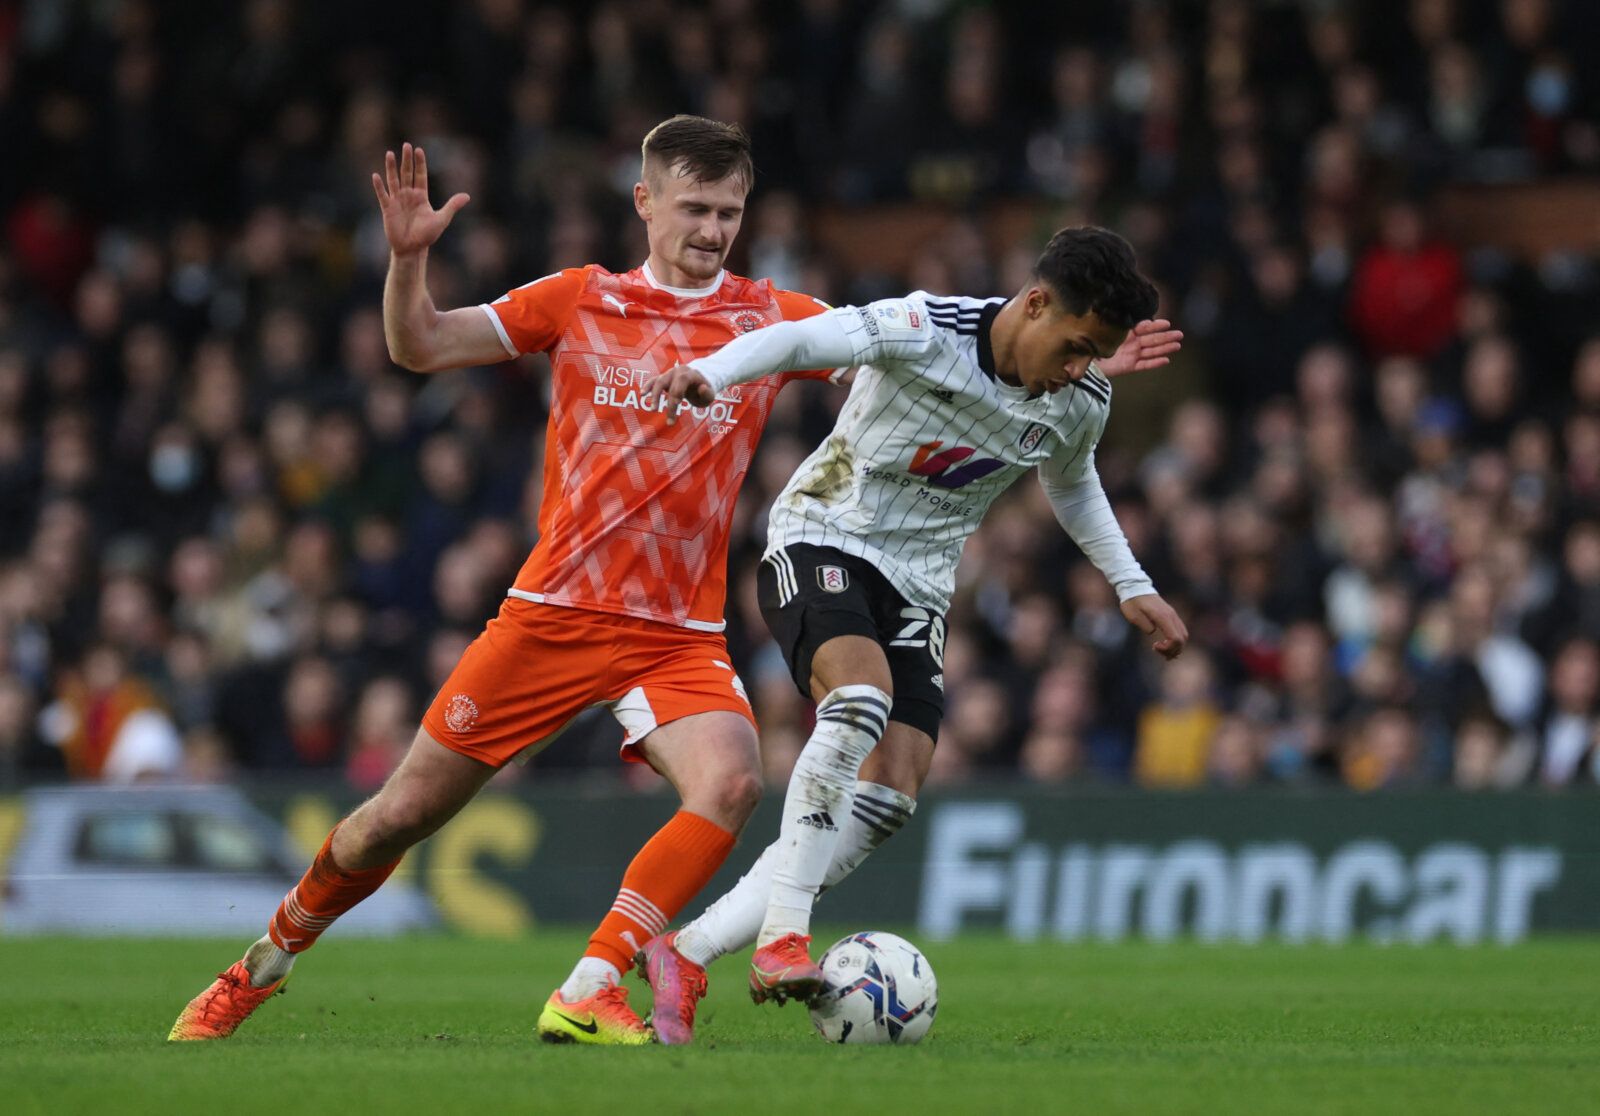 Soccer Football - Championship - Fulham v Blackpool - Craven Cottage, London, Britain - January 29, 2022 Blackpool's Callum Connolly in action with Fulham's Fabio Carvalho Action Images/Paul Childs EDITORIAL USE ONLY. No use with unauthorized audio, video, data, fixture lists, club/league logos or 'live' services. Online in-match use limited to 75 images, no video emulation. No use in betting, games or single club /league/player publications.  Please contact your account representative for furth